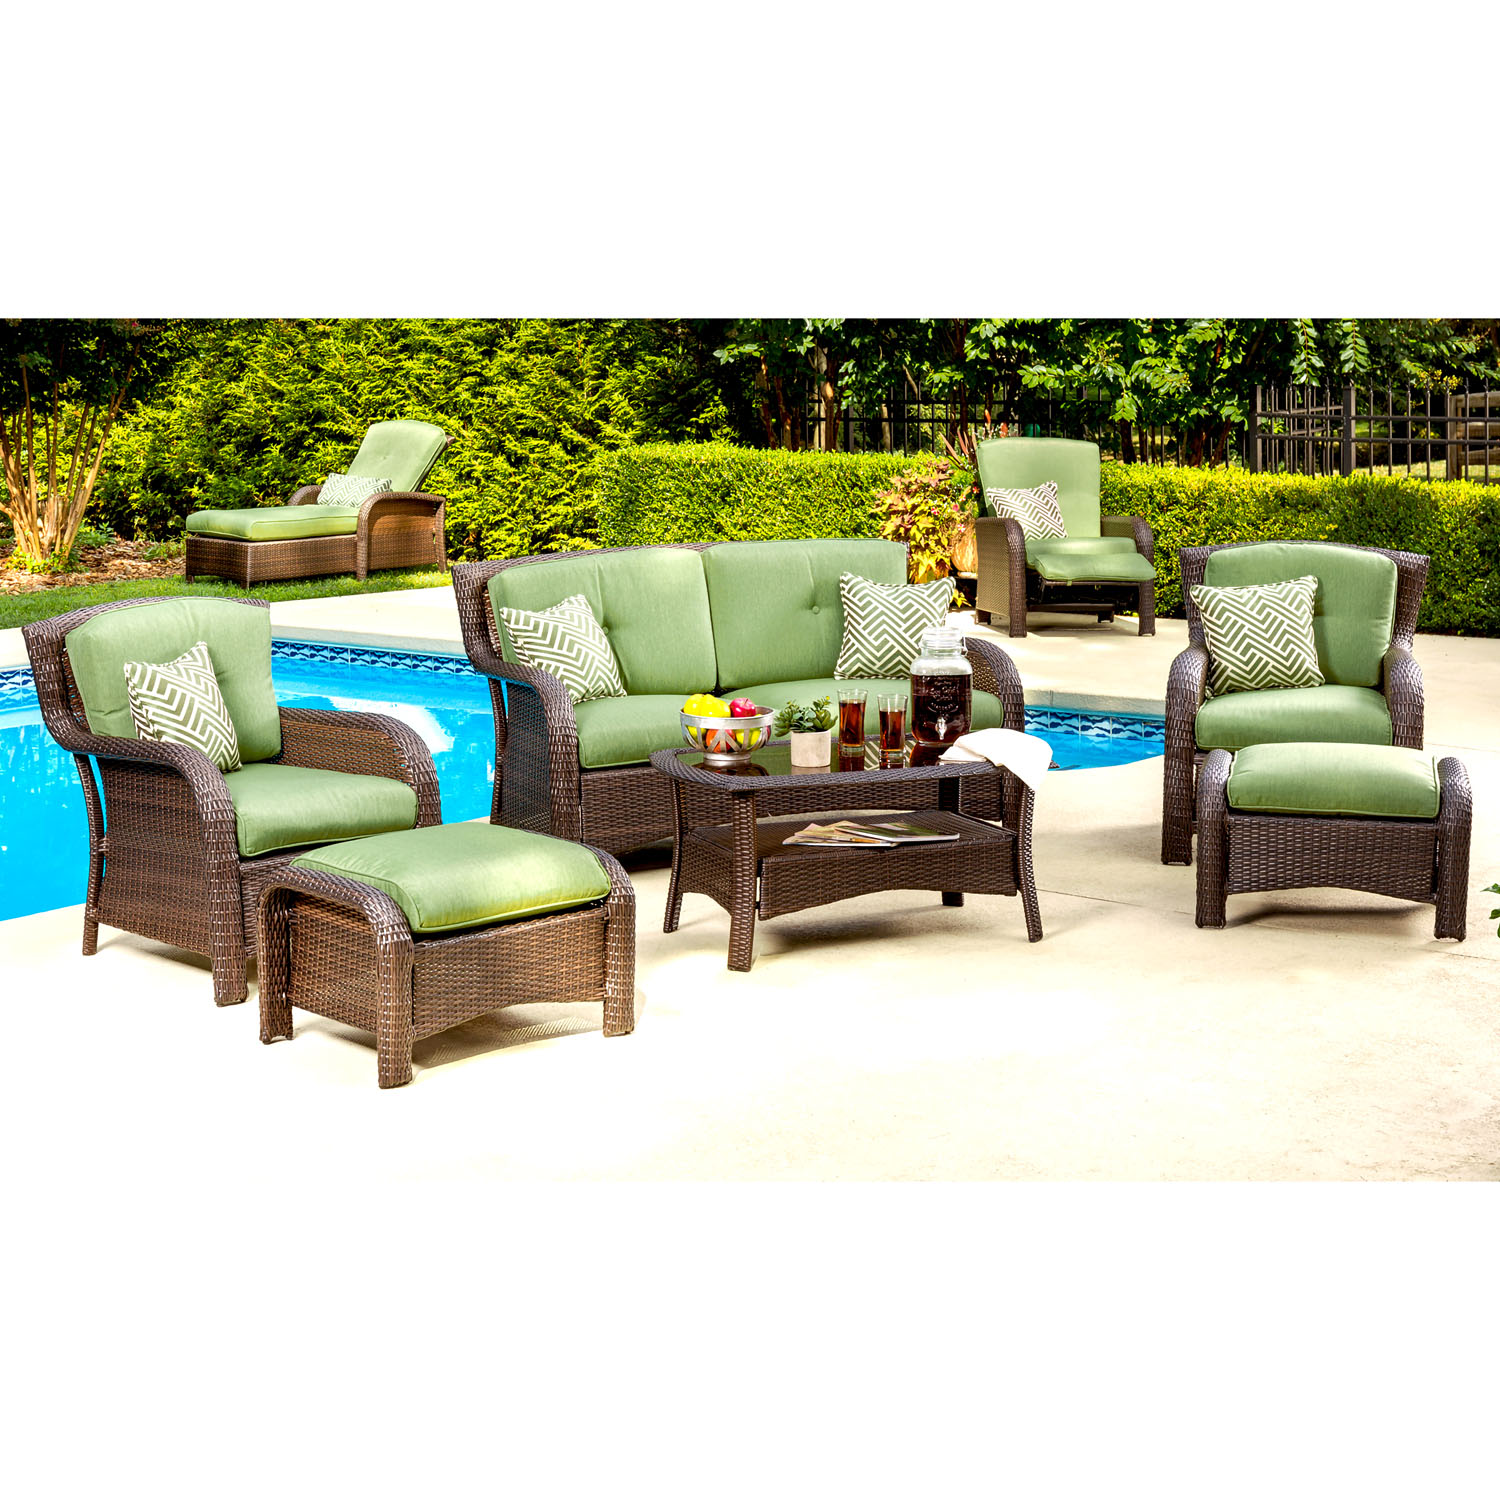 Hanover Strathmere 6-Piece Wicker and Steel Outdoor Conversation Set, Cilantro Green - image 5 of 15